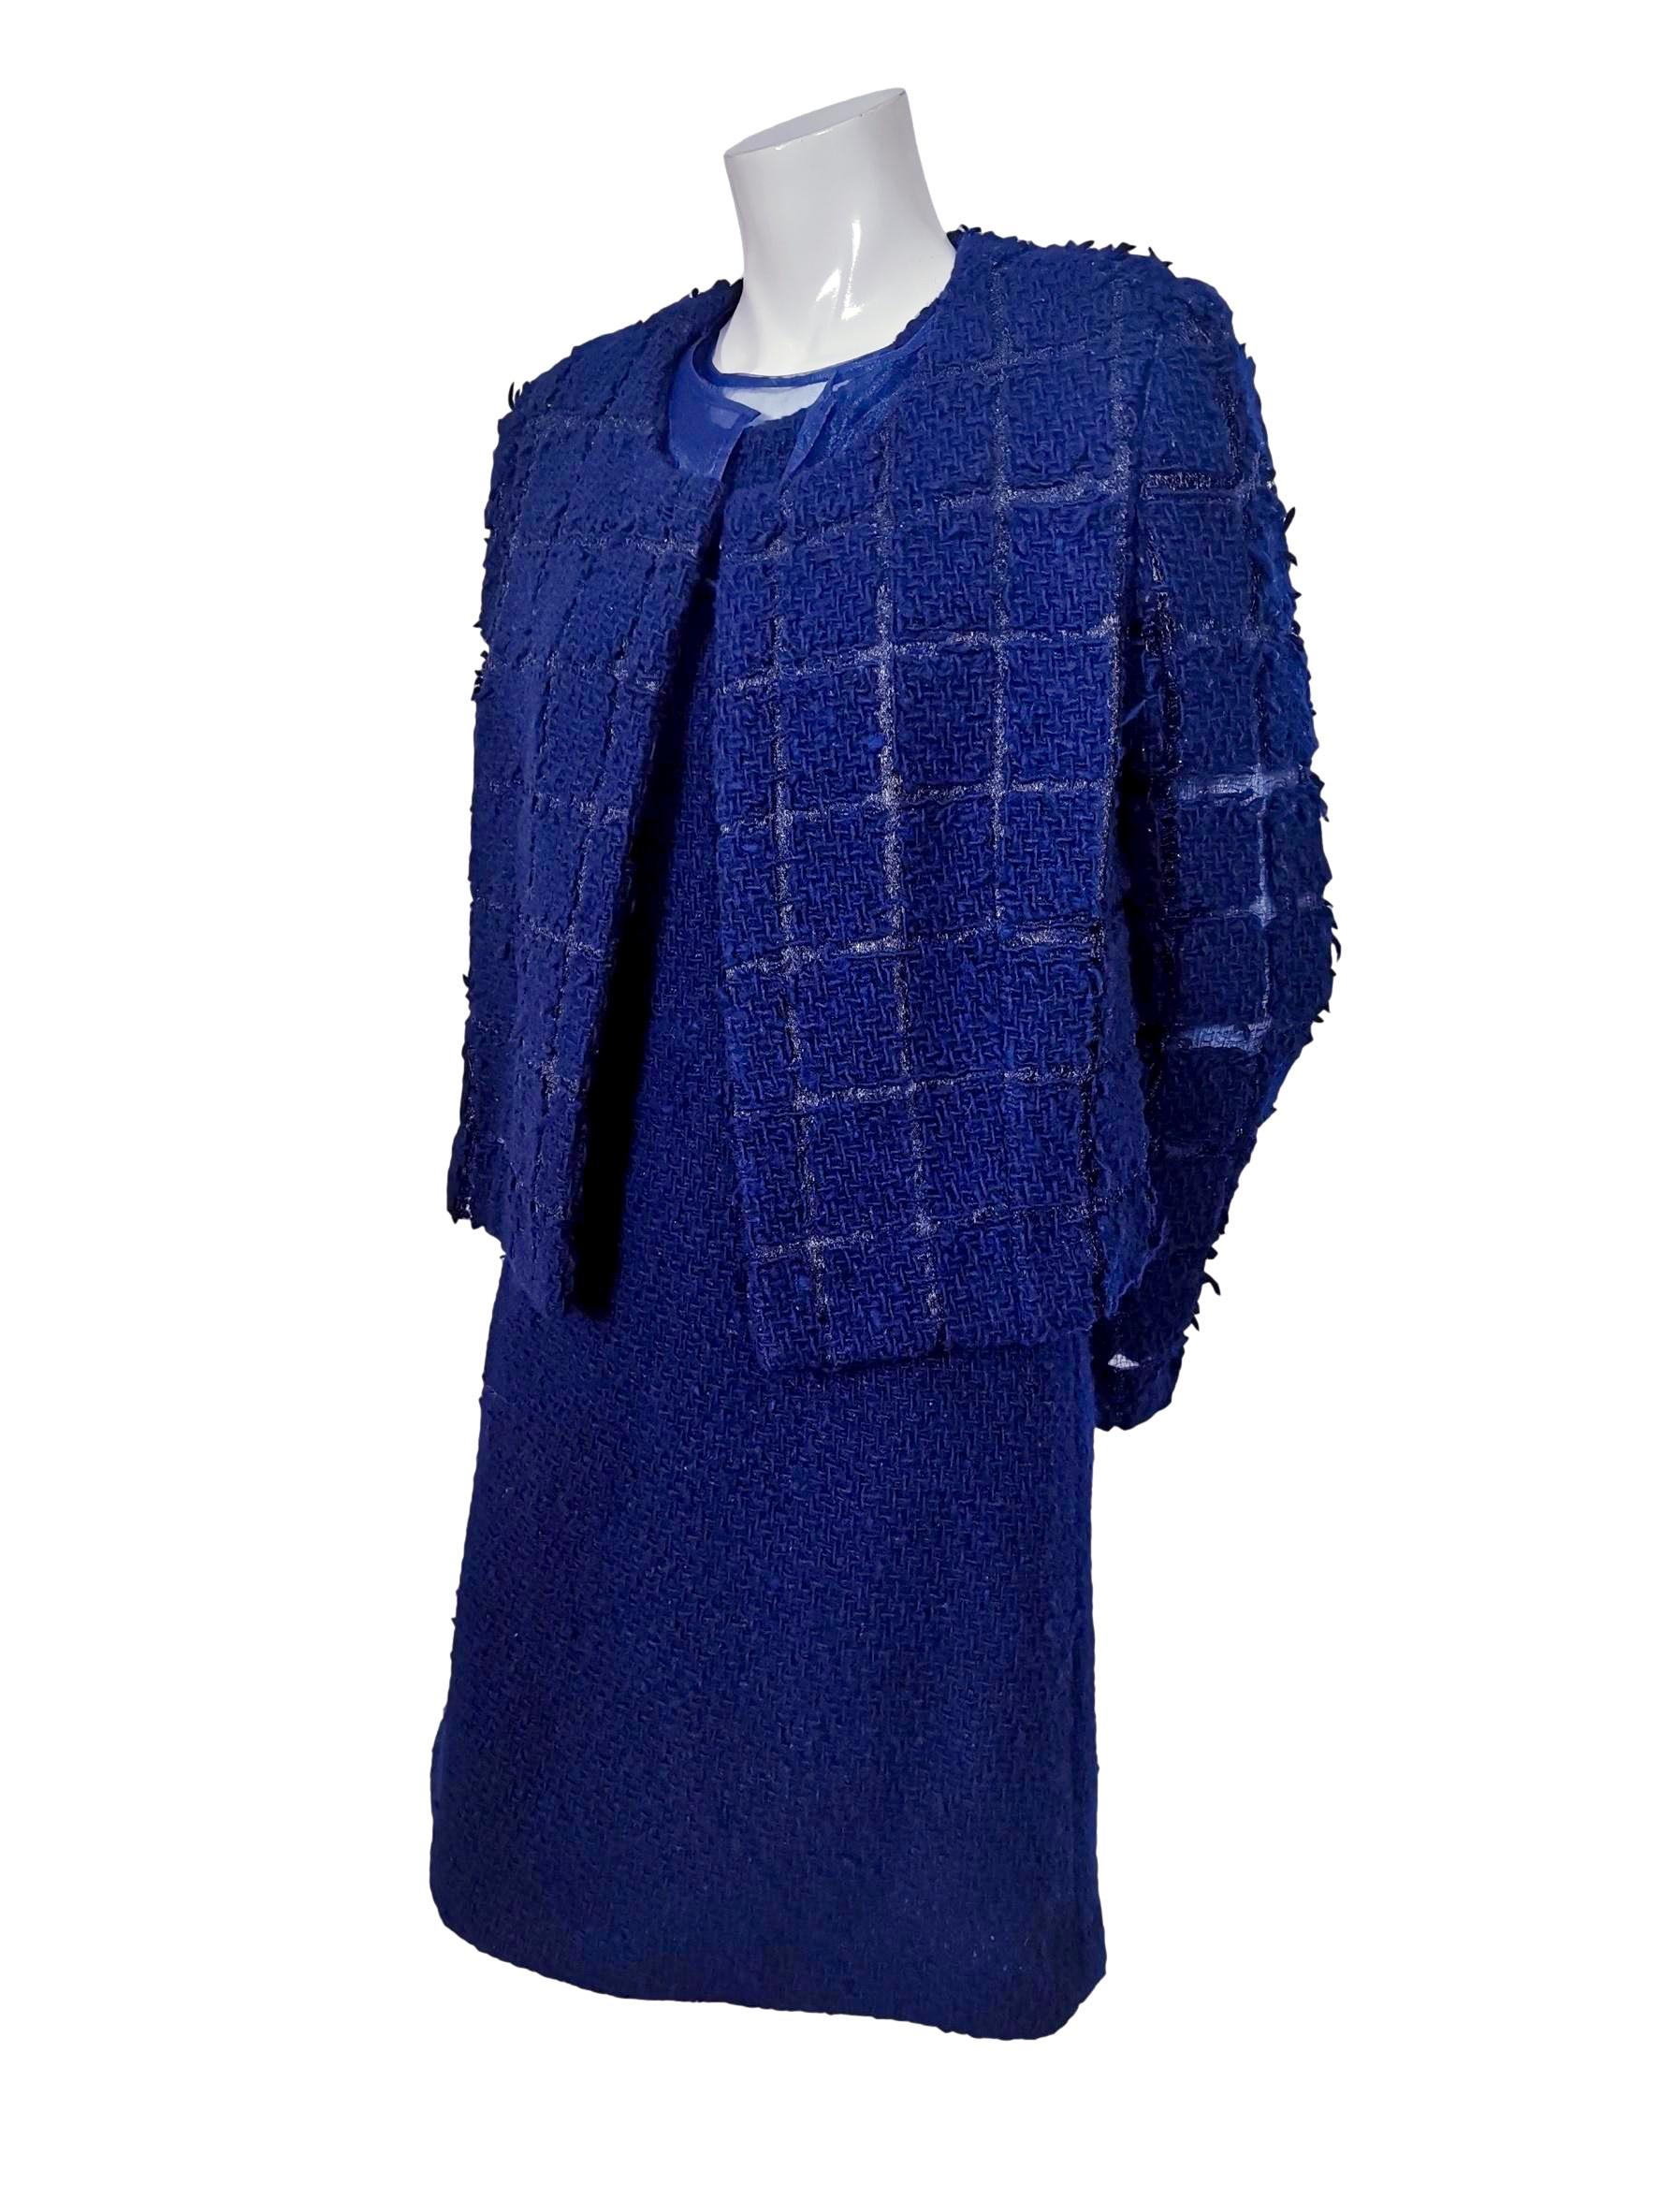 Comme des Garcons 1997 Organza Lined Wool Dress and Jacket For Sale 3